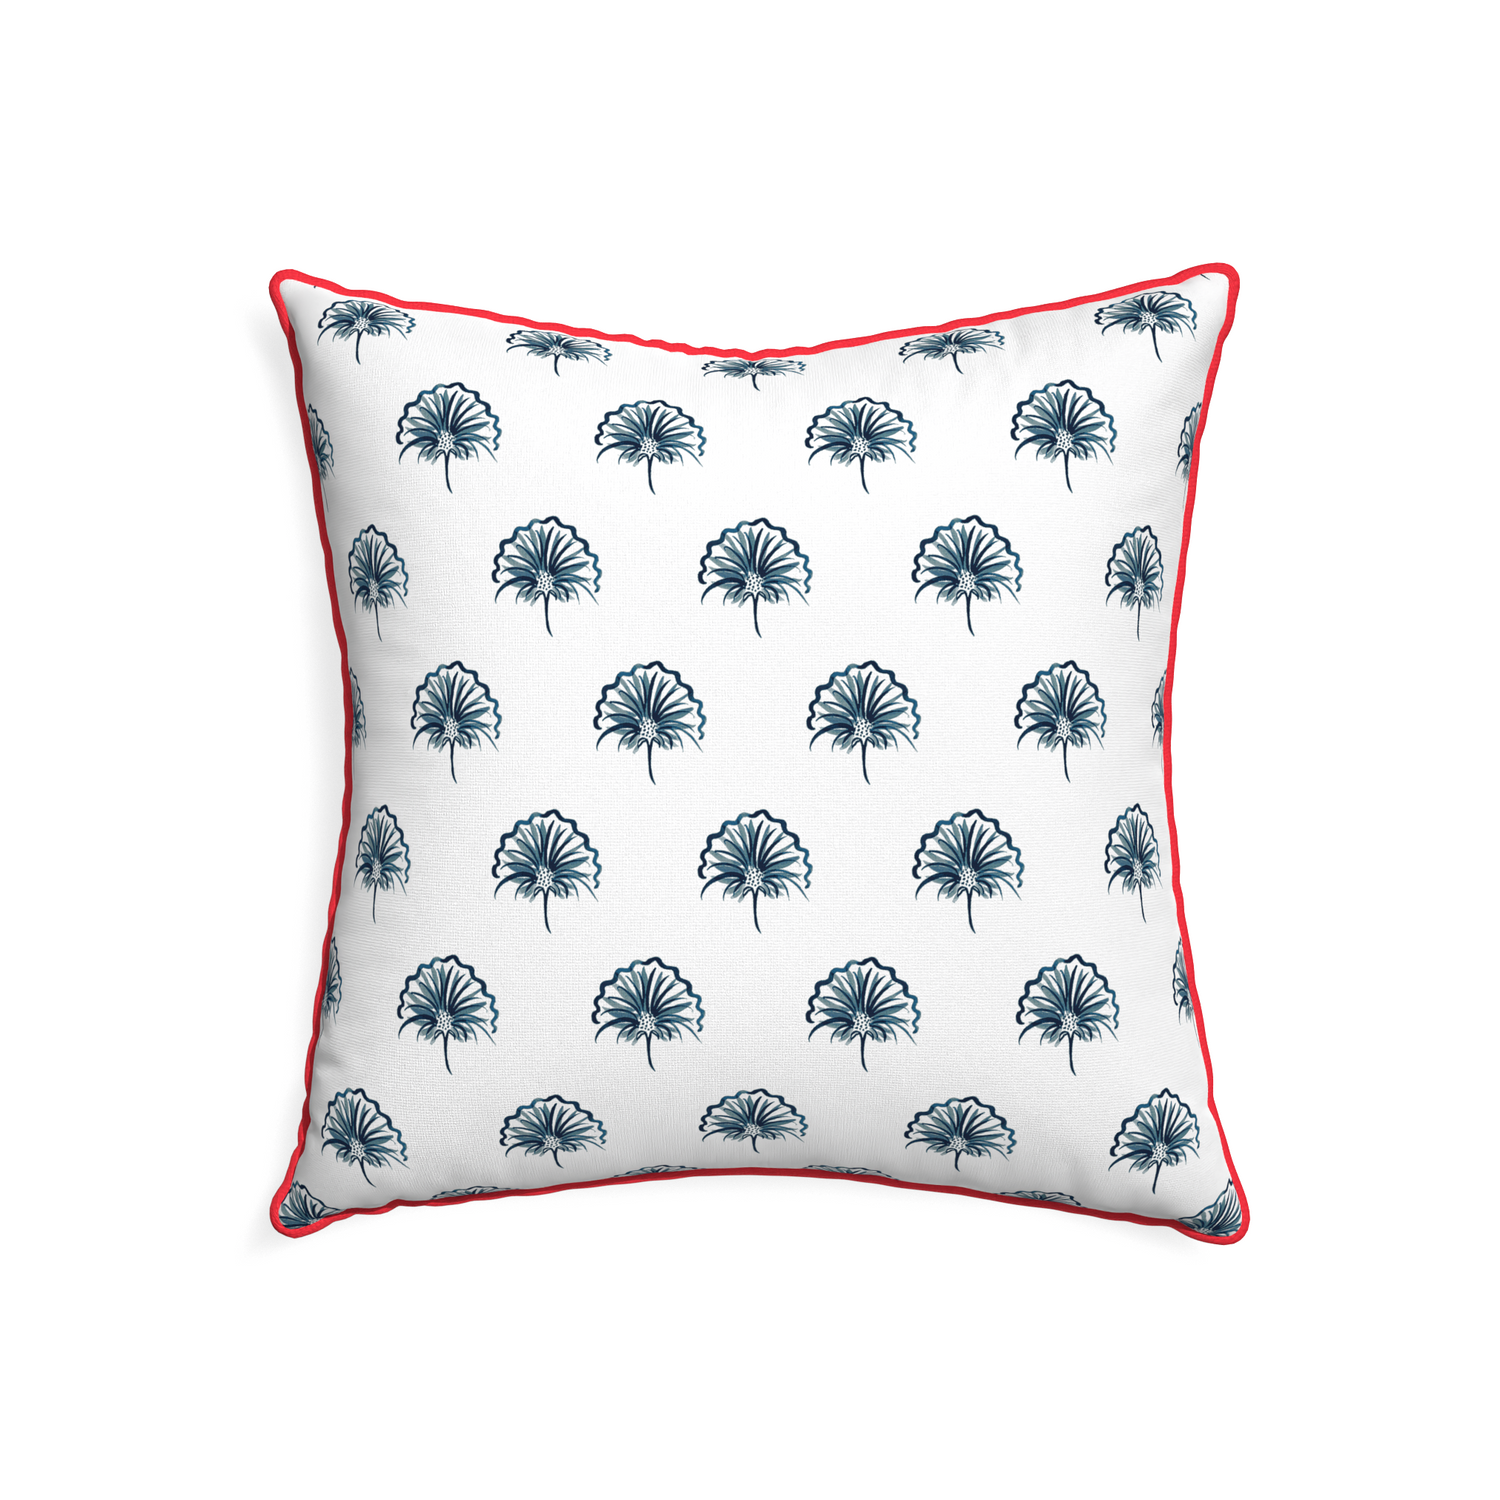 22-square penelope midnight custom pillow with cherry piping on white background